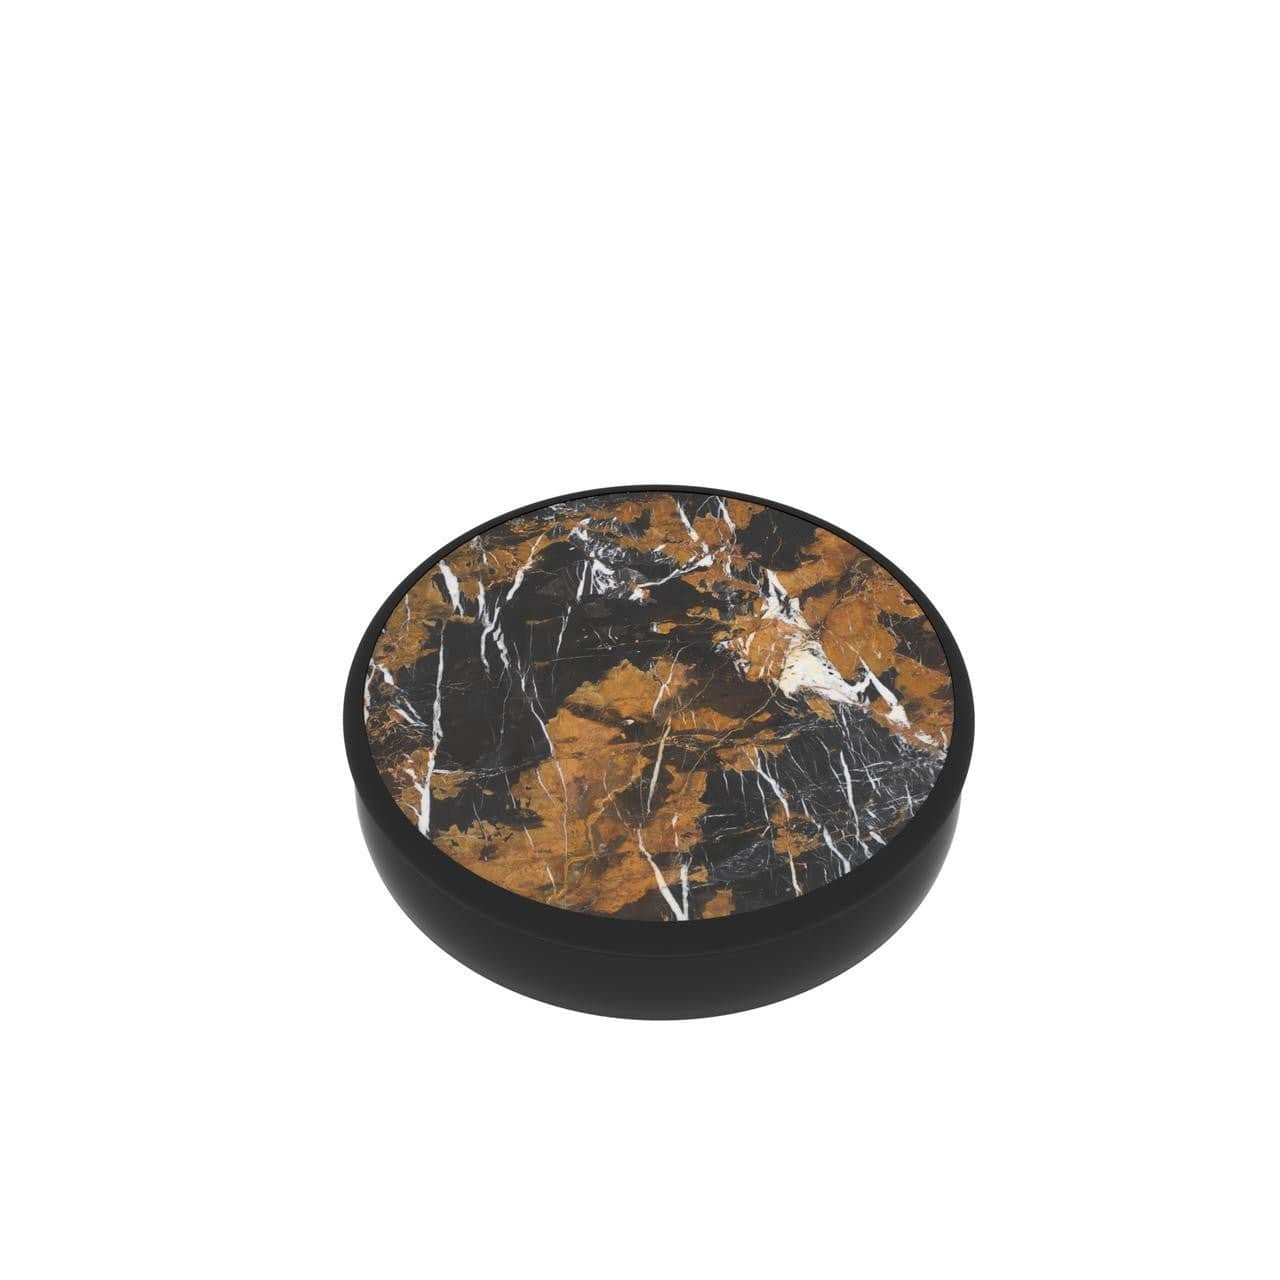 Magnetic Phone Grip and Stand with built in magnets (Black Gold Marble)